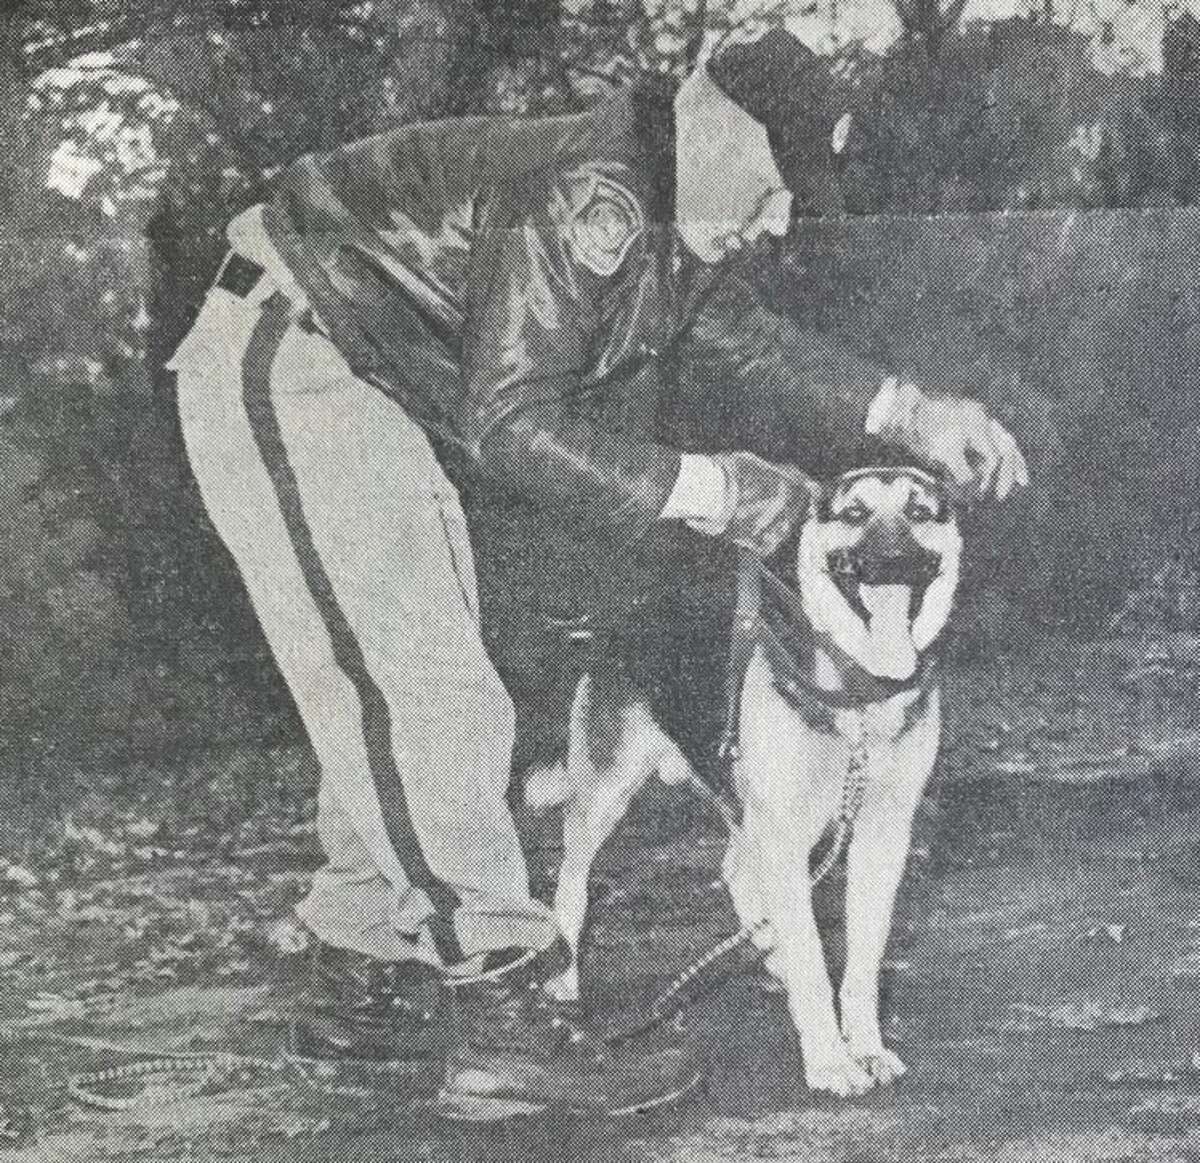 Bay City State Police Trooper Raymond Brotebeck puts a tracking harness on his dog, Bismarck. December 1968 